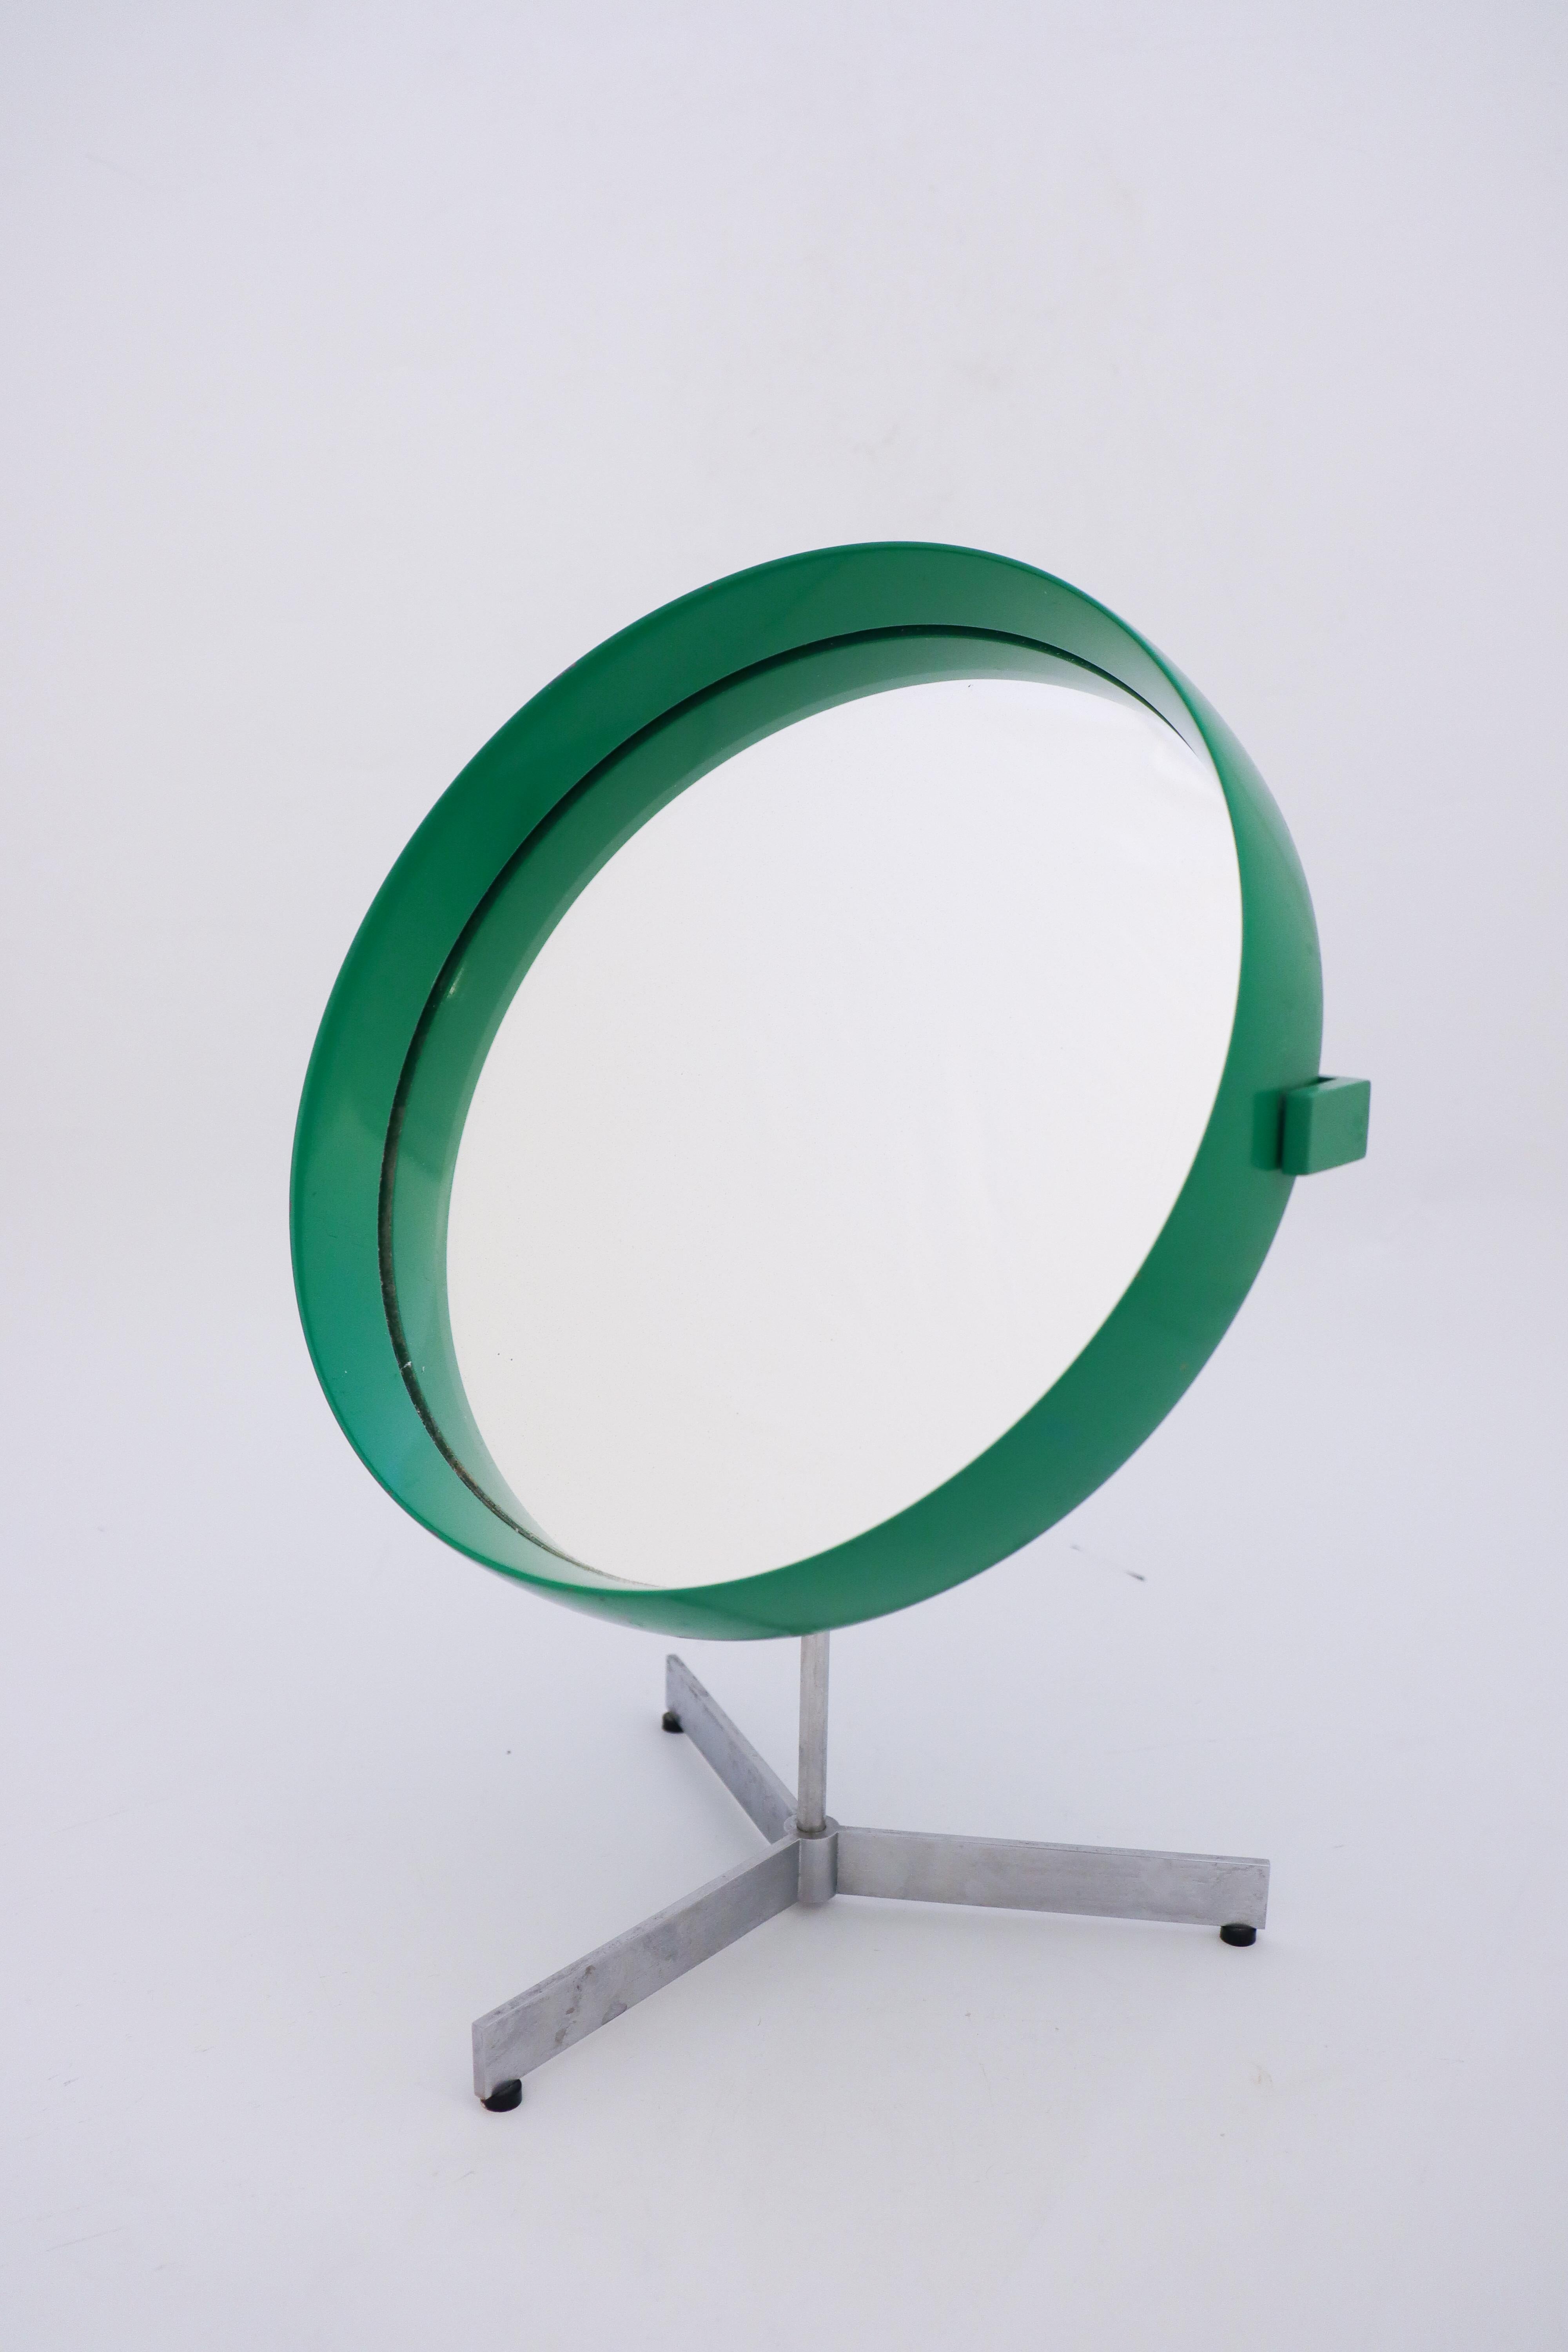 A lovely green table mirror designed by Uno & Östen Kristiansson. Produced by Luxus in Vittsjö, Sweden in the 1960s. Base in brushed aluminum. It is adjustable in angle and swiveling. It is in very good condition except from some dust between the